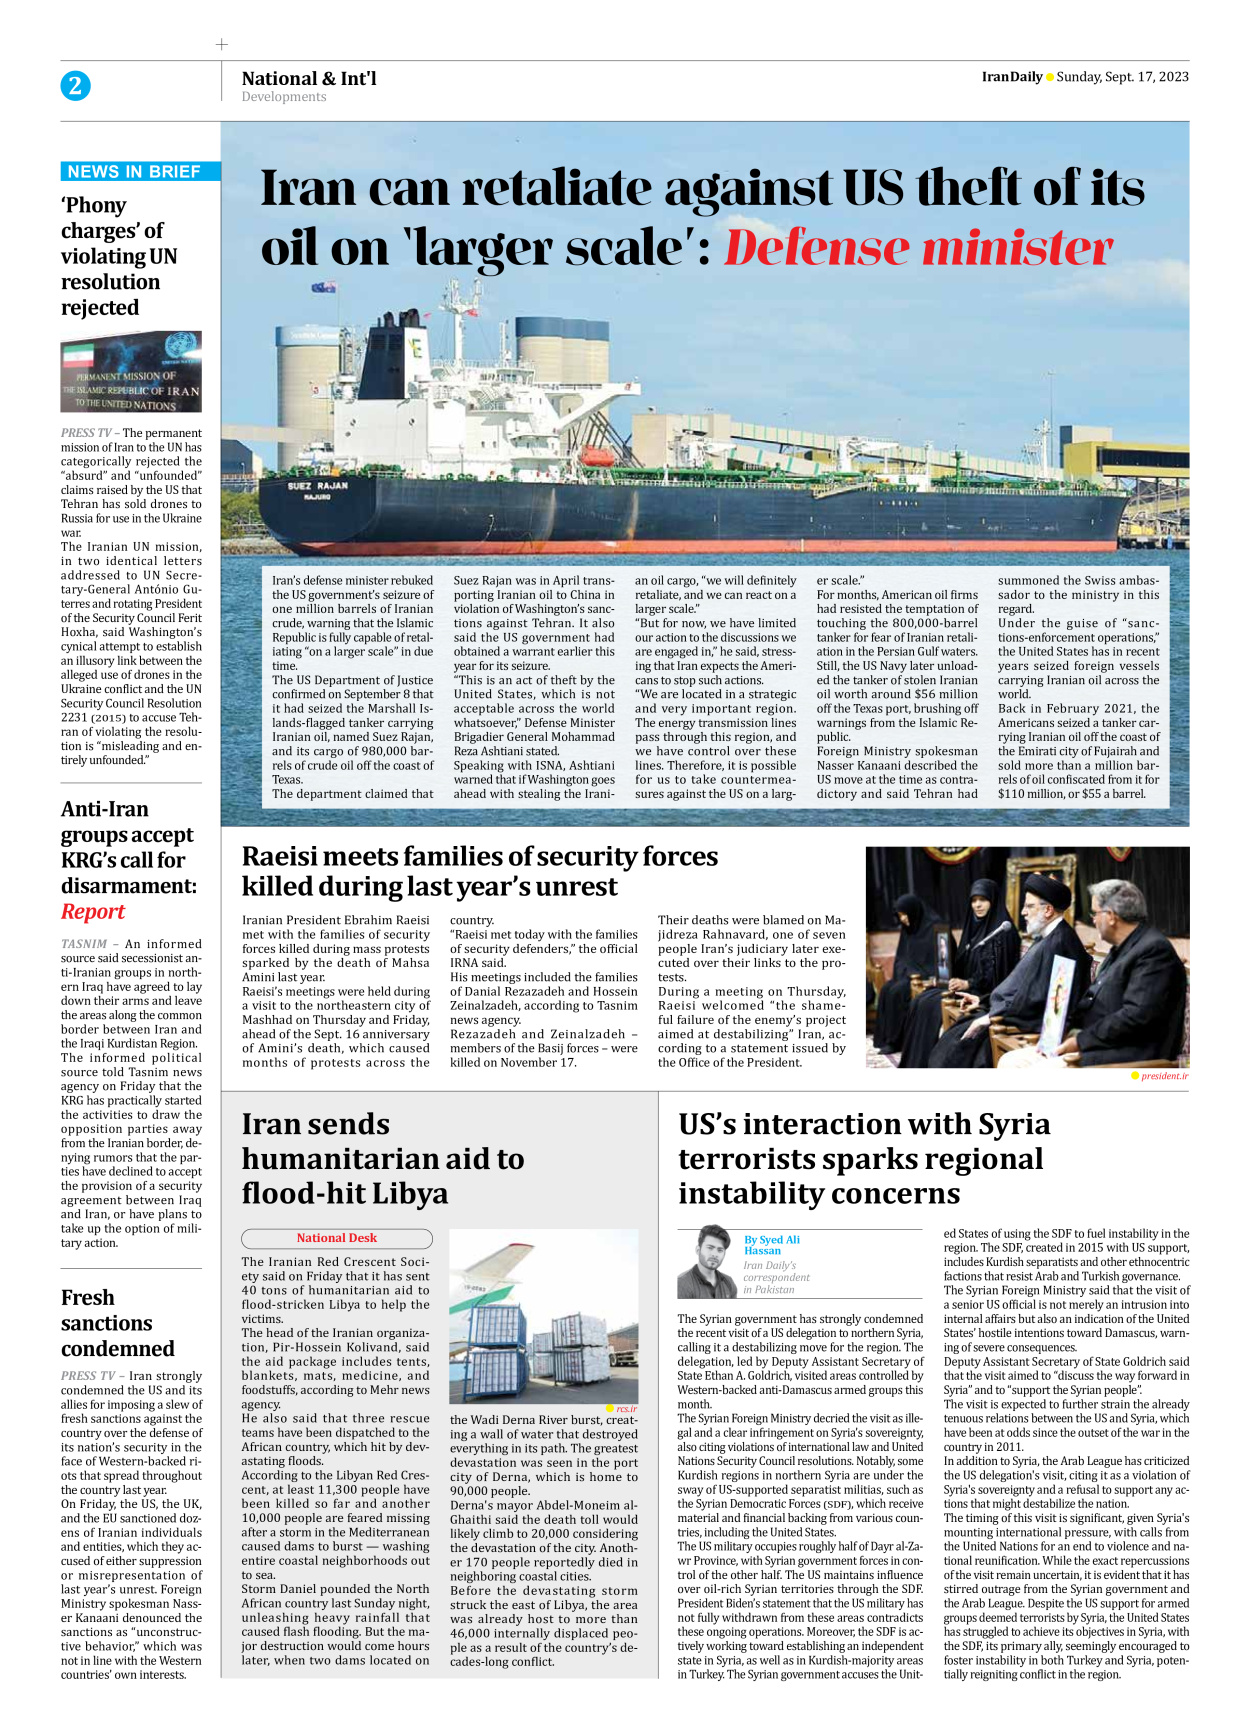 Iran Daily - Number Seven Thousand Three Hundred and Eighty Seven - 17 September 2023 - Page 2